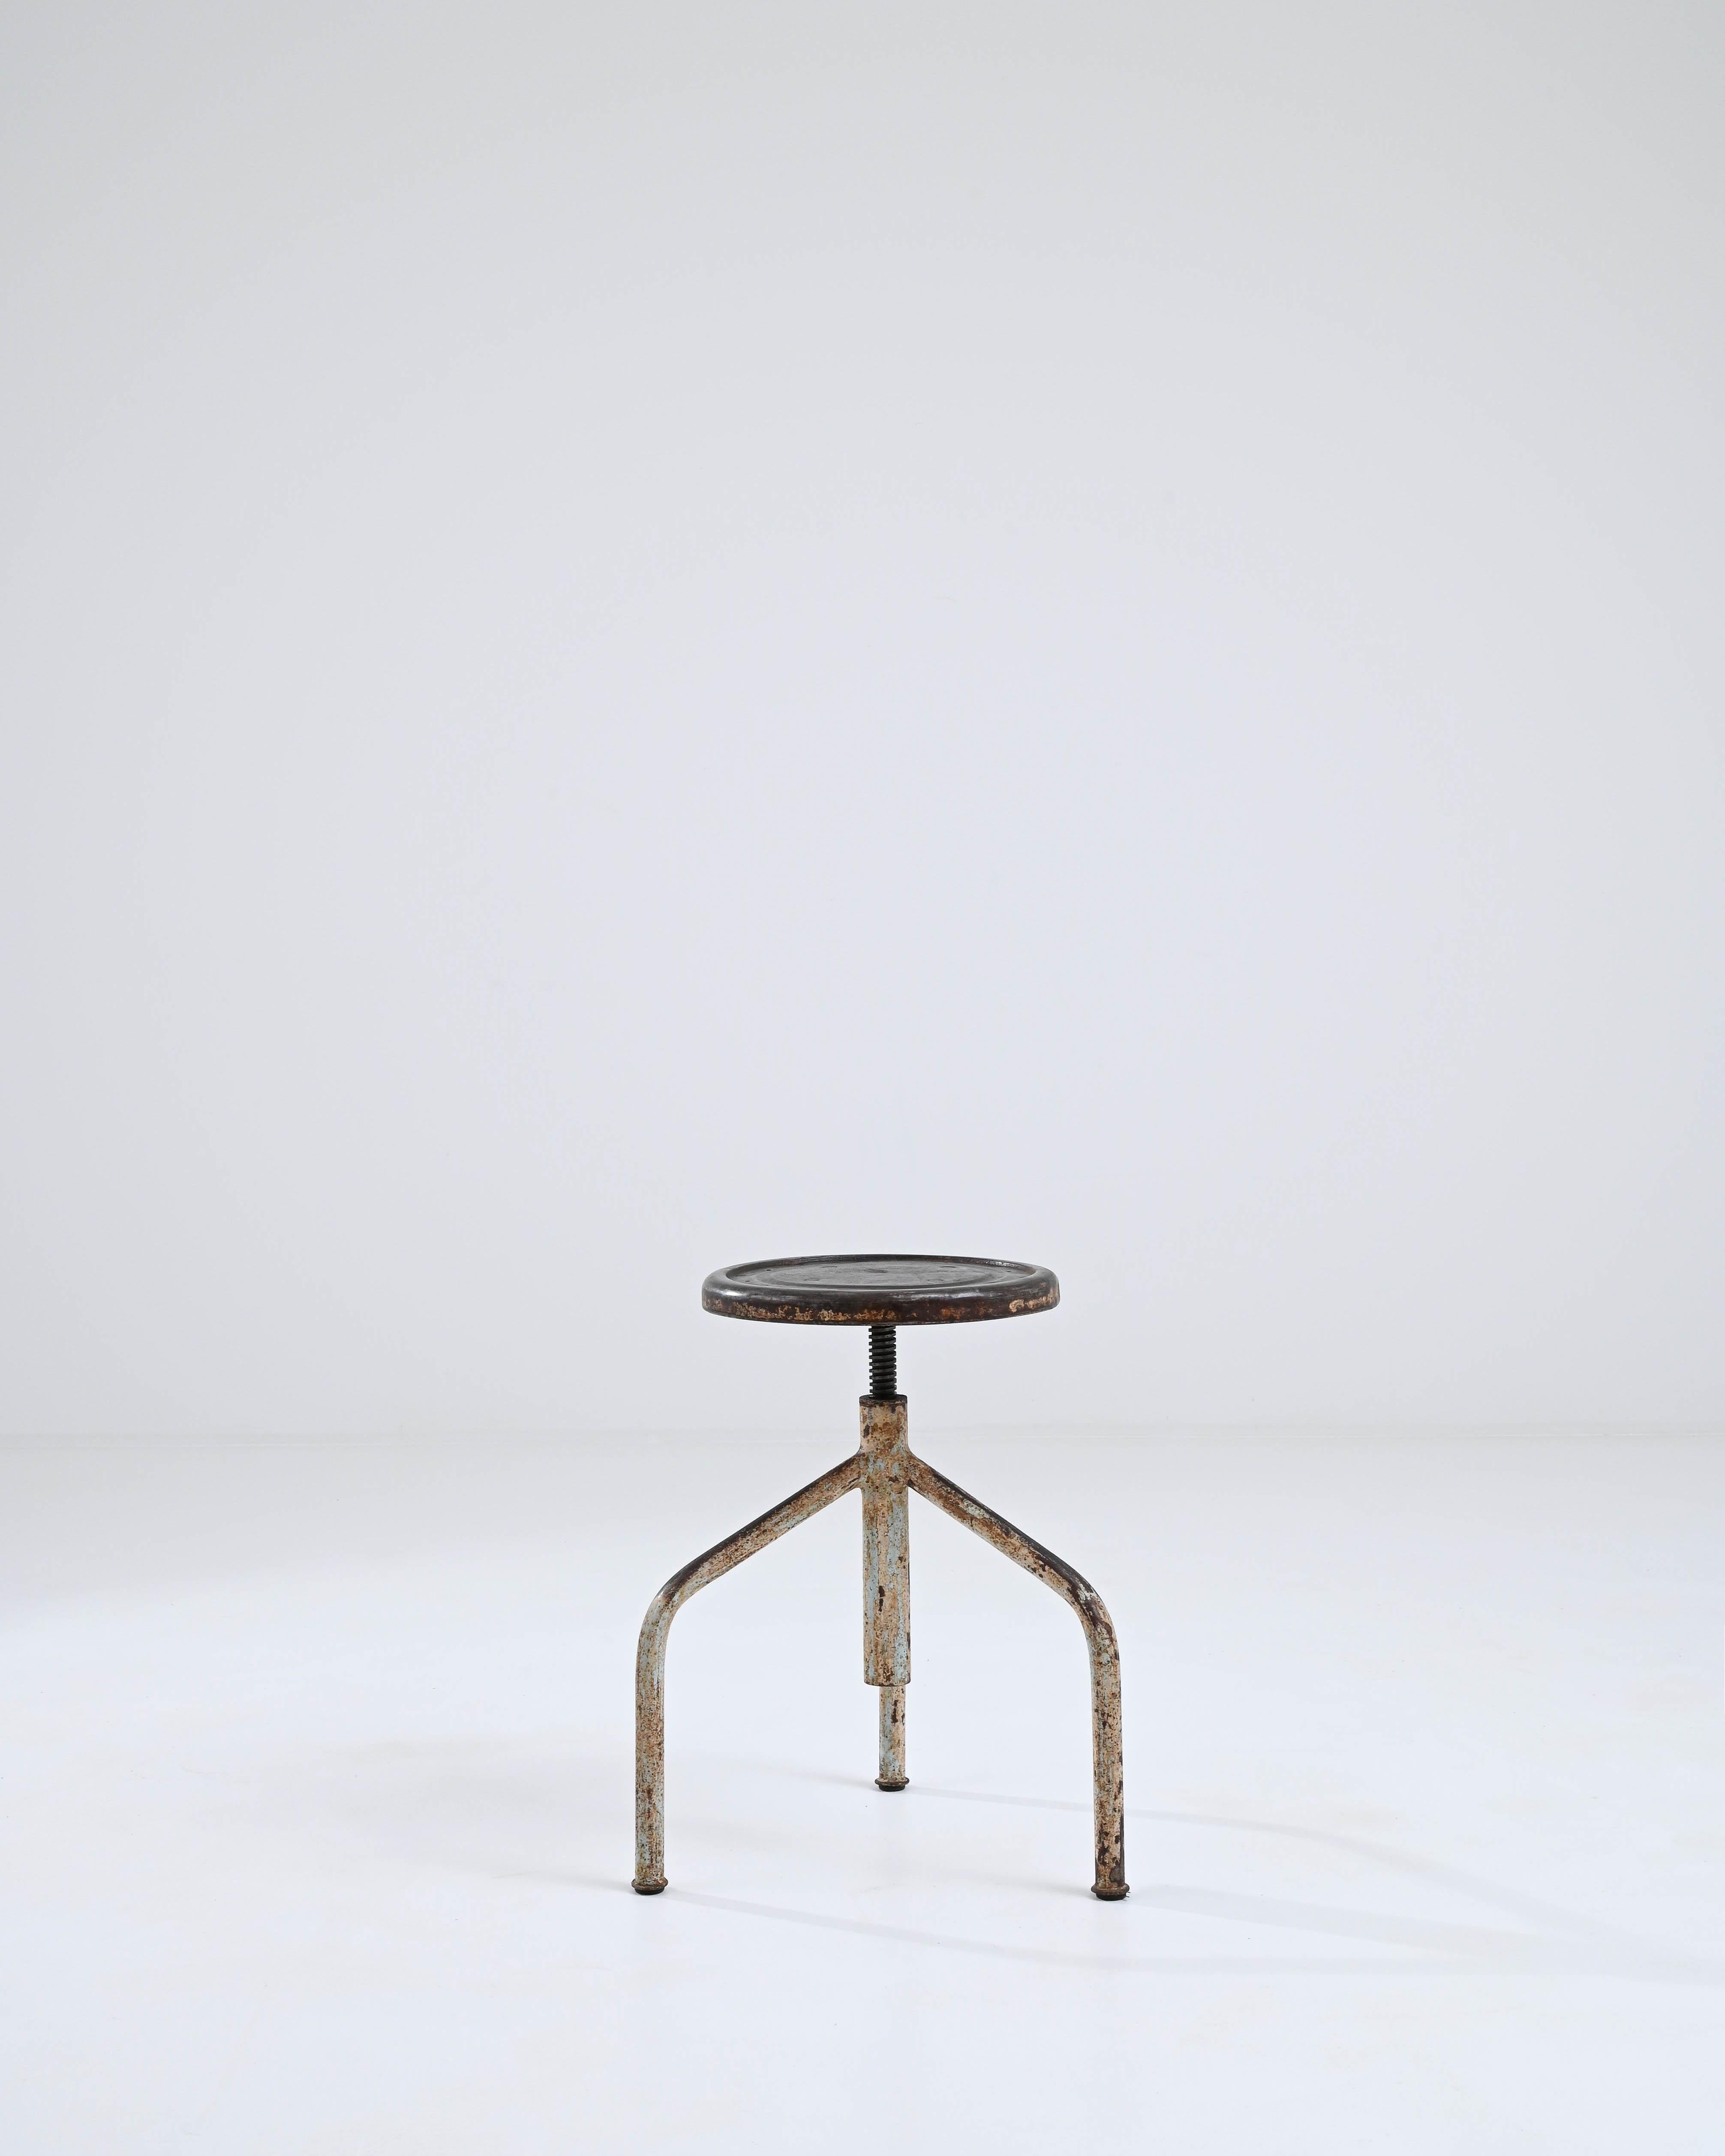 A metal stool made in 20th century central Europe. The pleasingly simple tripod structure that composes this industrial stool has been coated in a fascinating patina, with browns, beiges, and greens mingling together in surprising harmony.